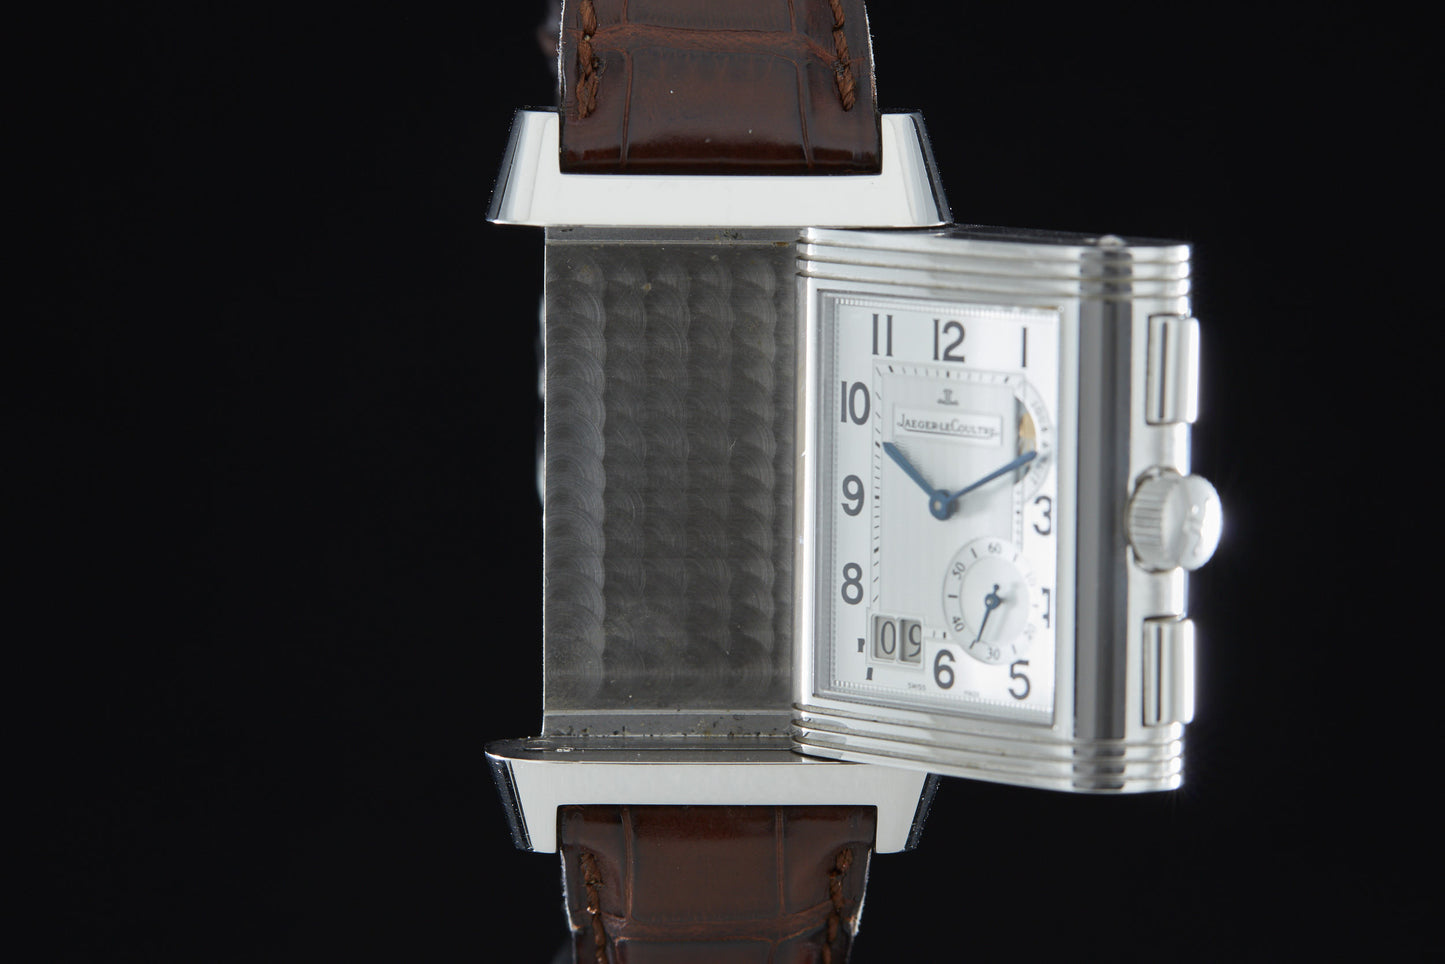 Jaeger-LeCoultre Grande Reverso GMT Duoface Special Edition